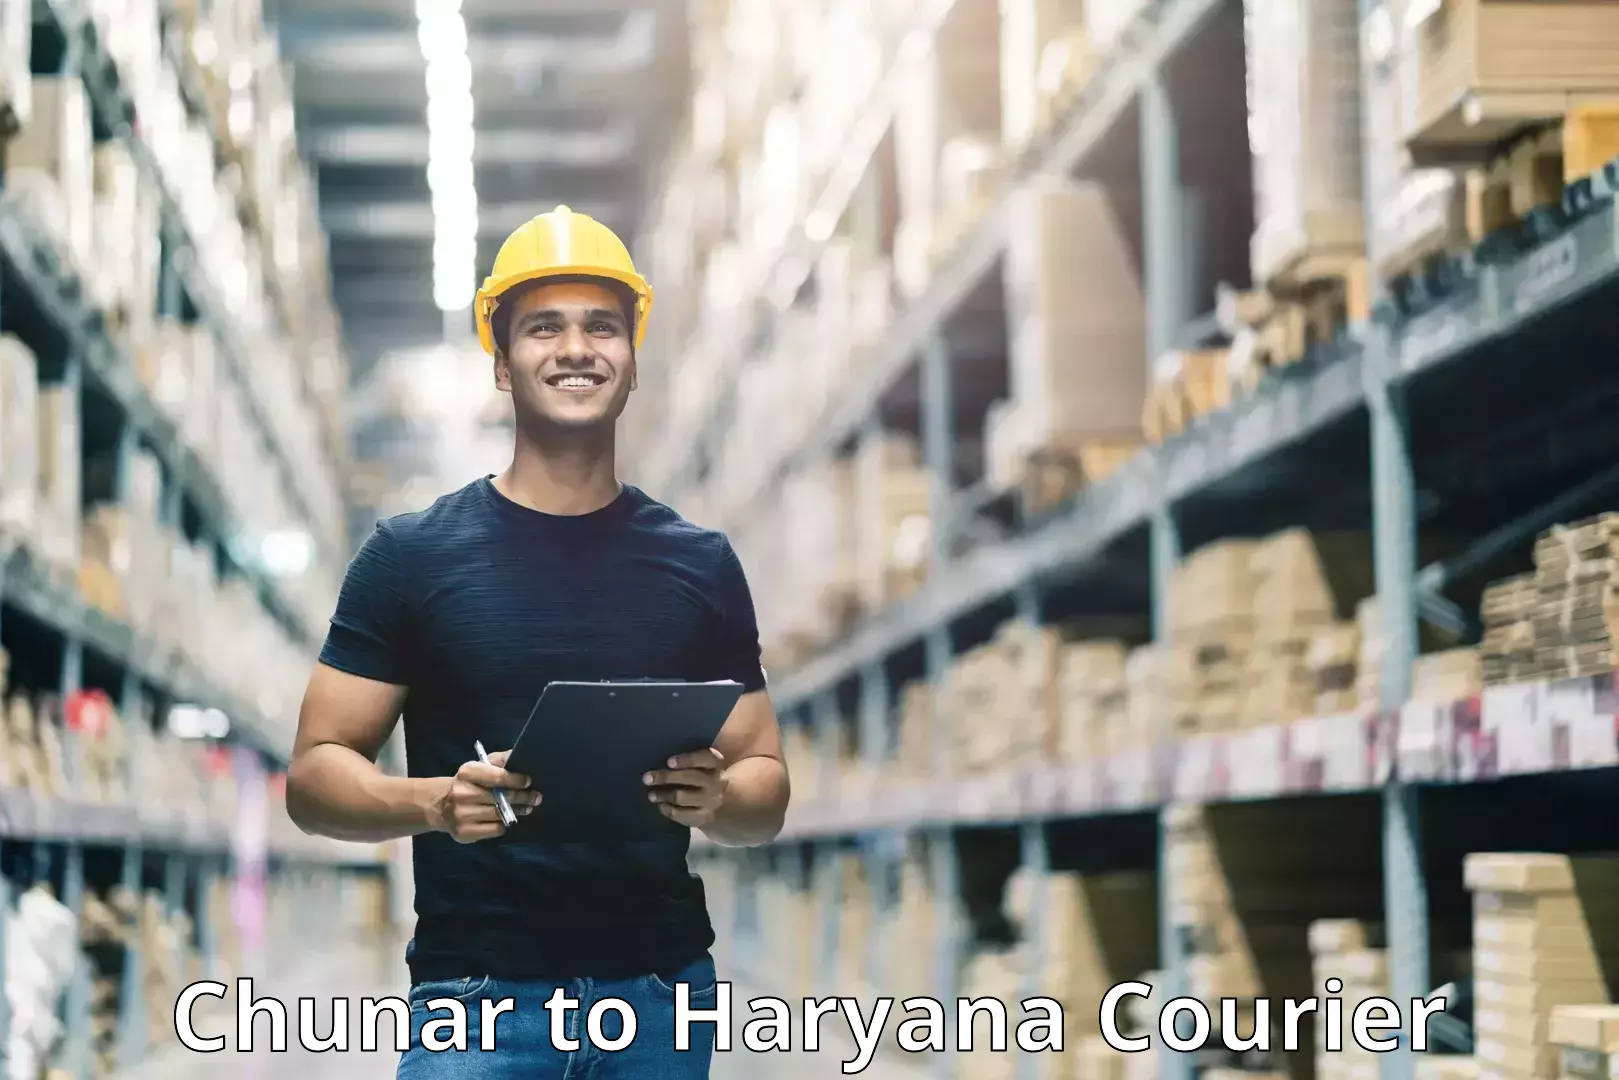 Cash on delivery service Chunar to Haryana